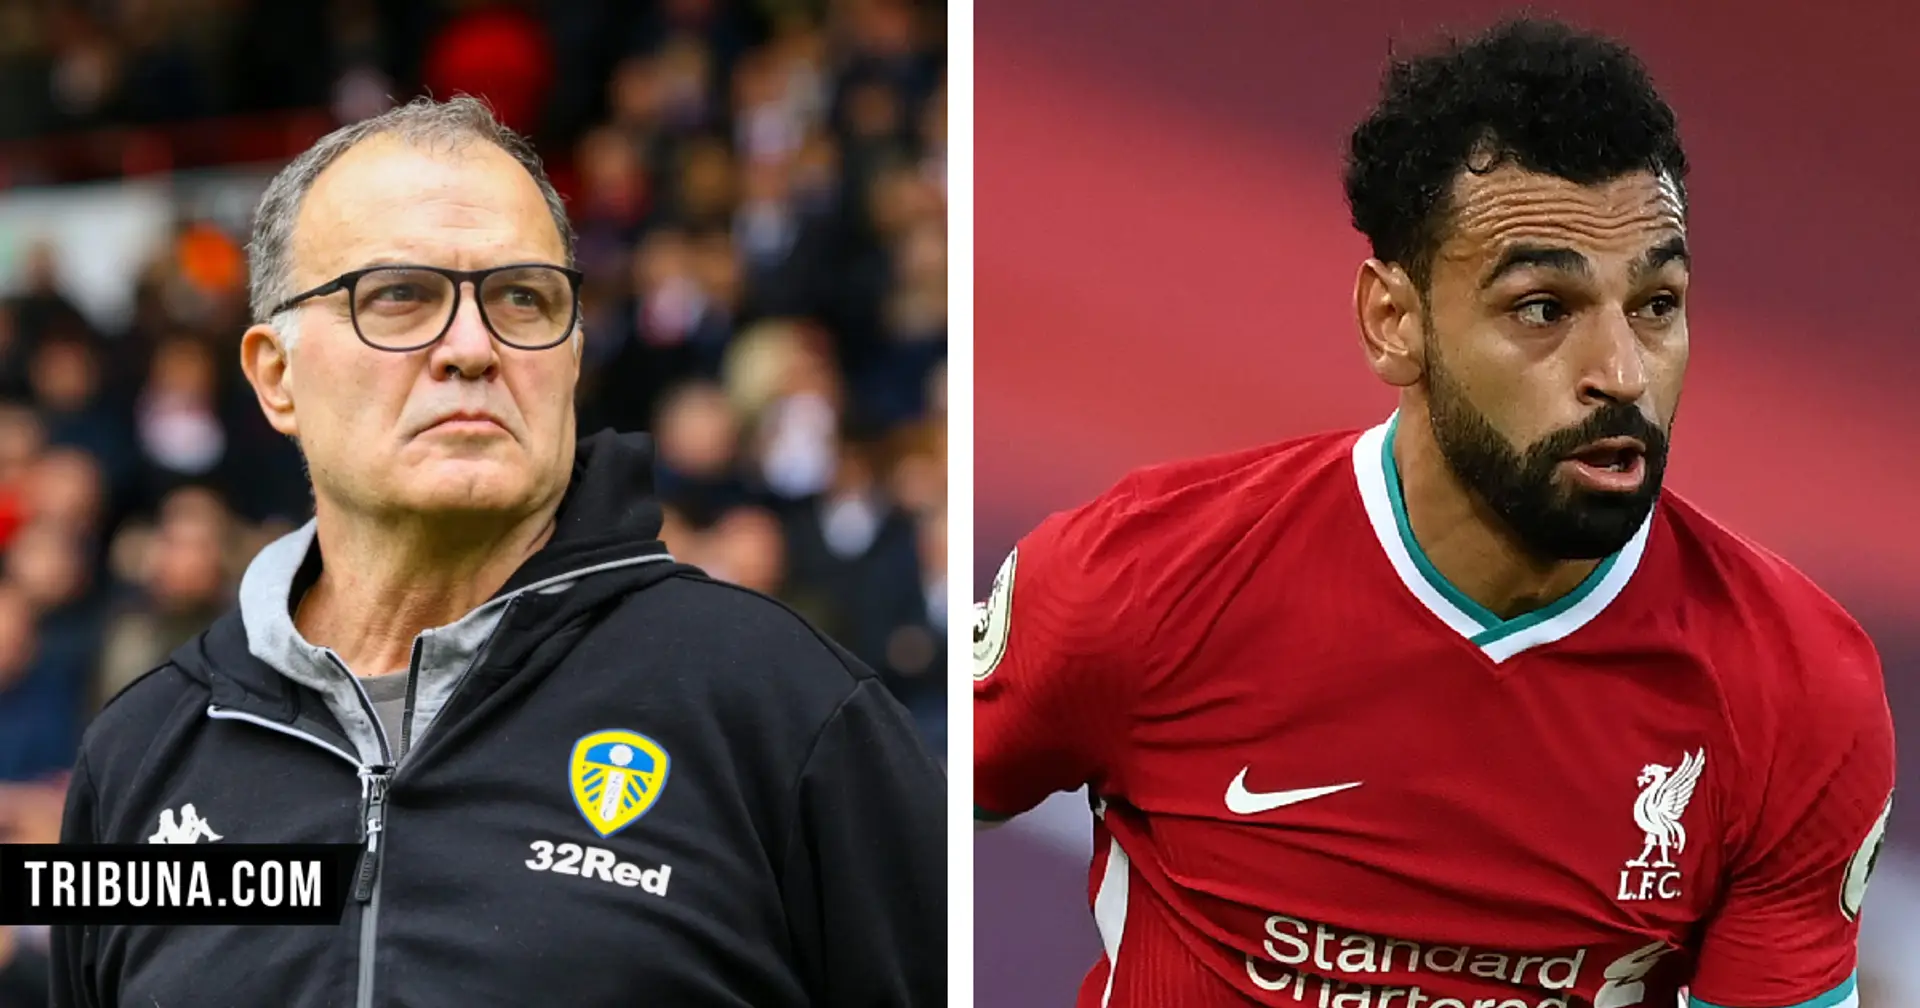 'Their fullbacks are wingers and their wingers are strikers': Marcelo Bielsa's take on Liverpool ahead of Leeds game